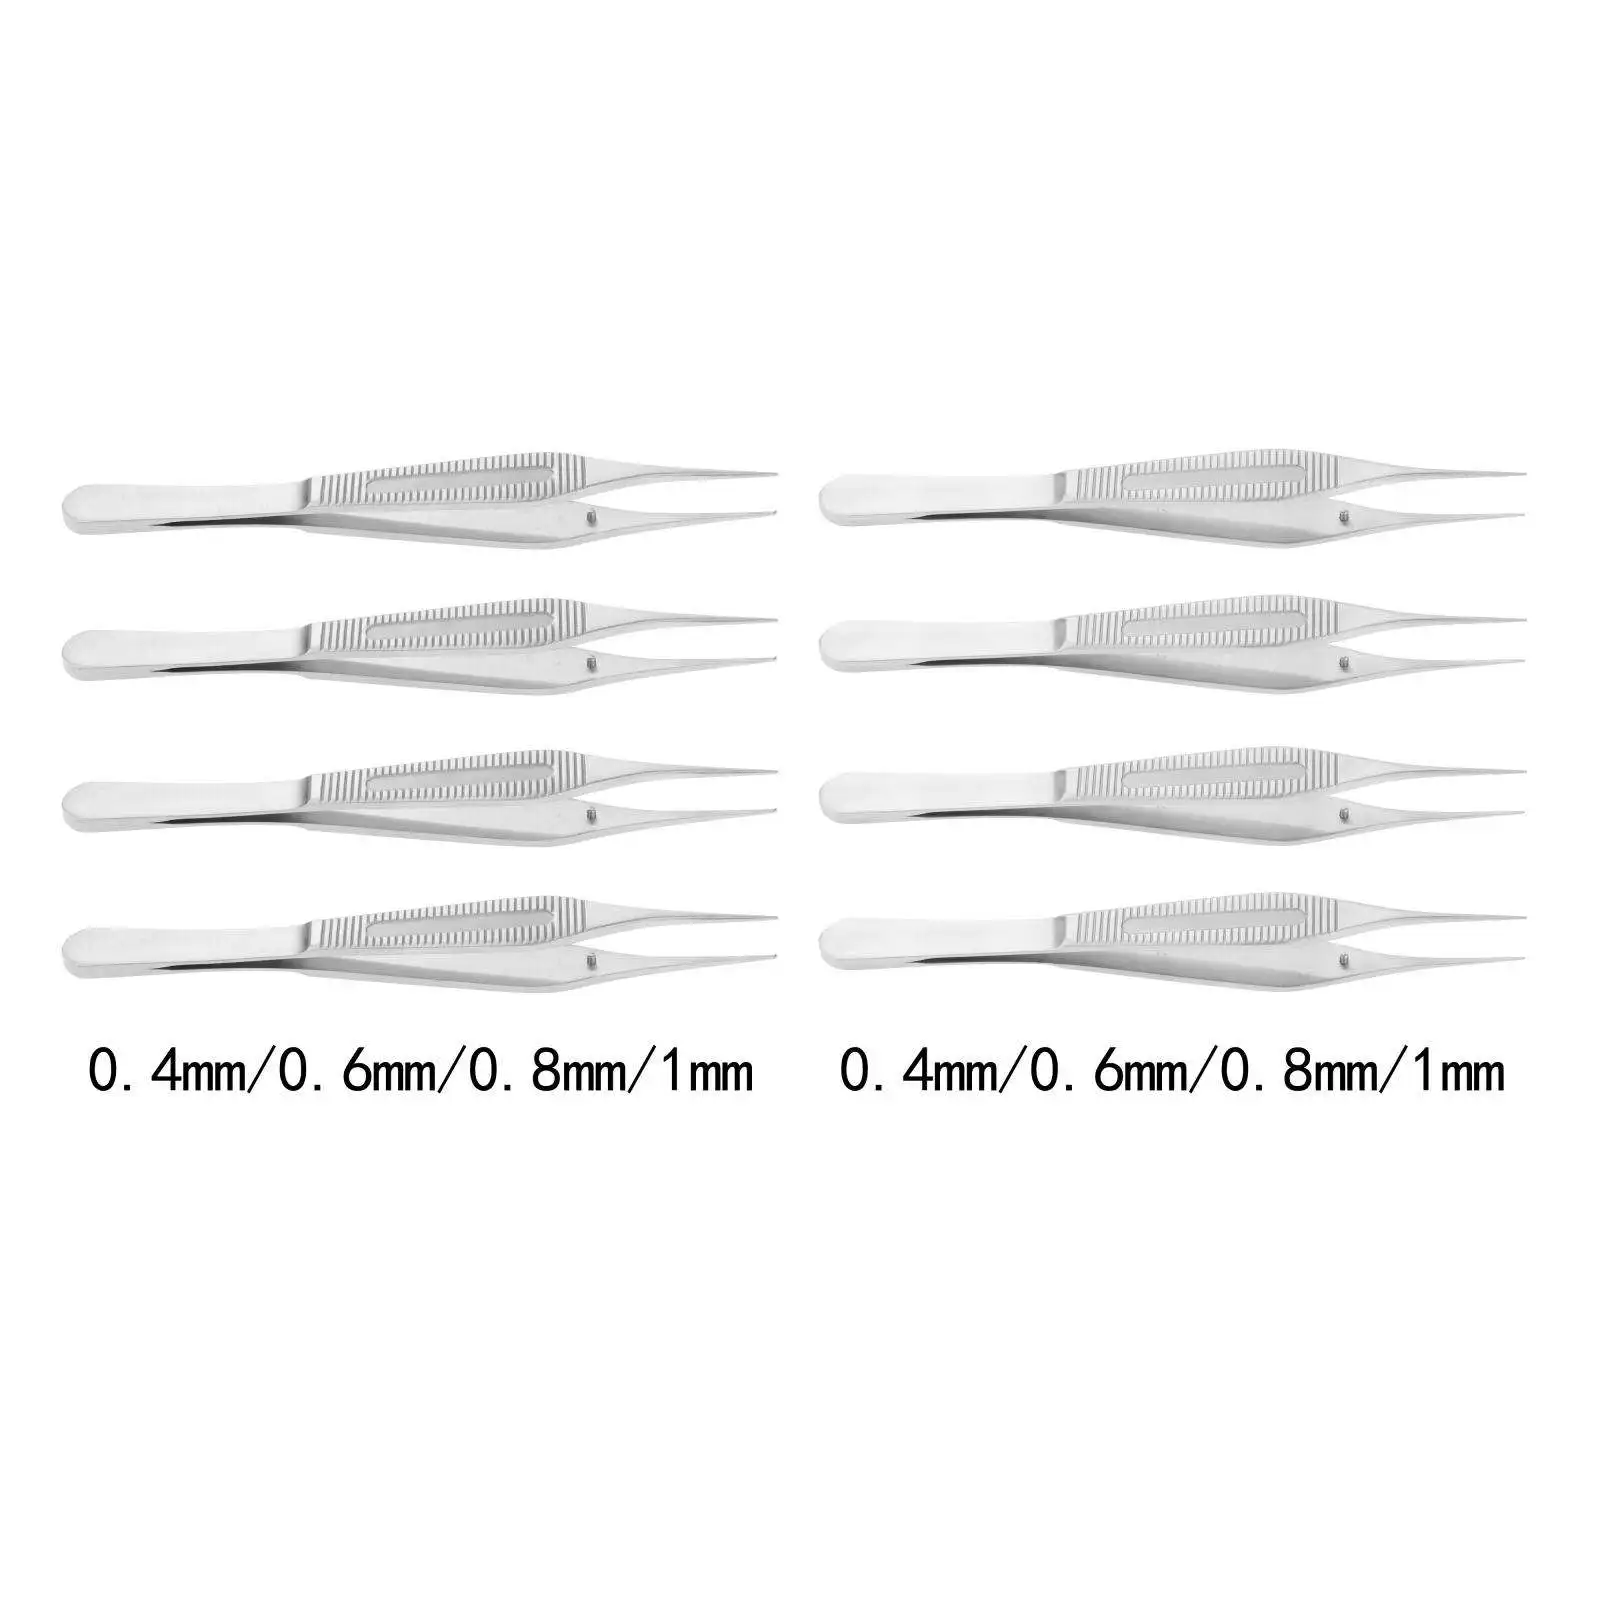 Long Fat Tweezers Durable Pointed Portable Precision Remover Repair Tool for Surgery Facial Hair Cosmetic Microscopes Home Use